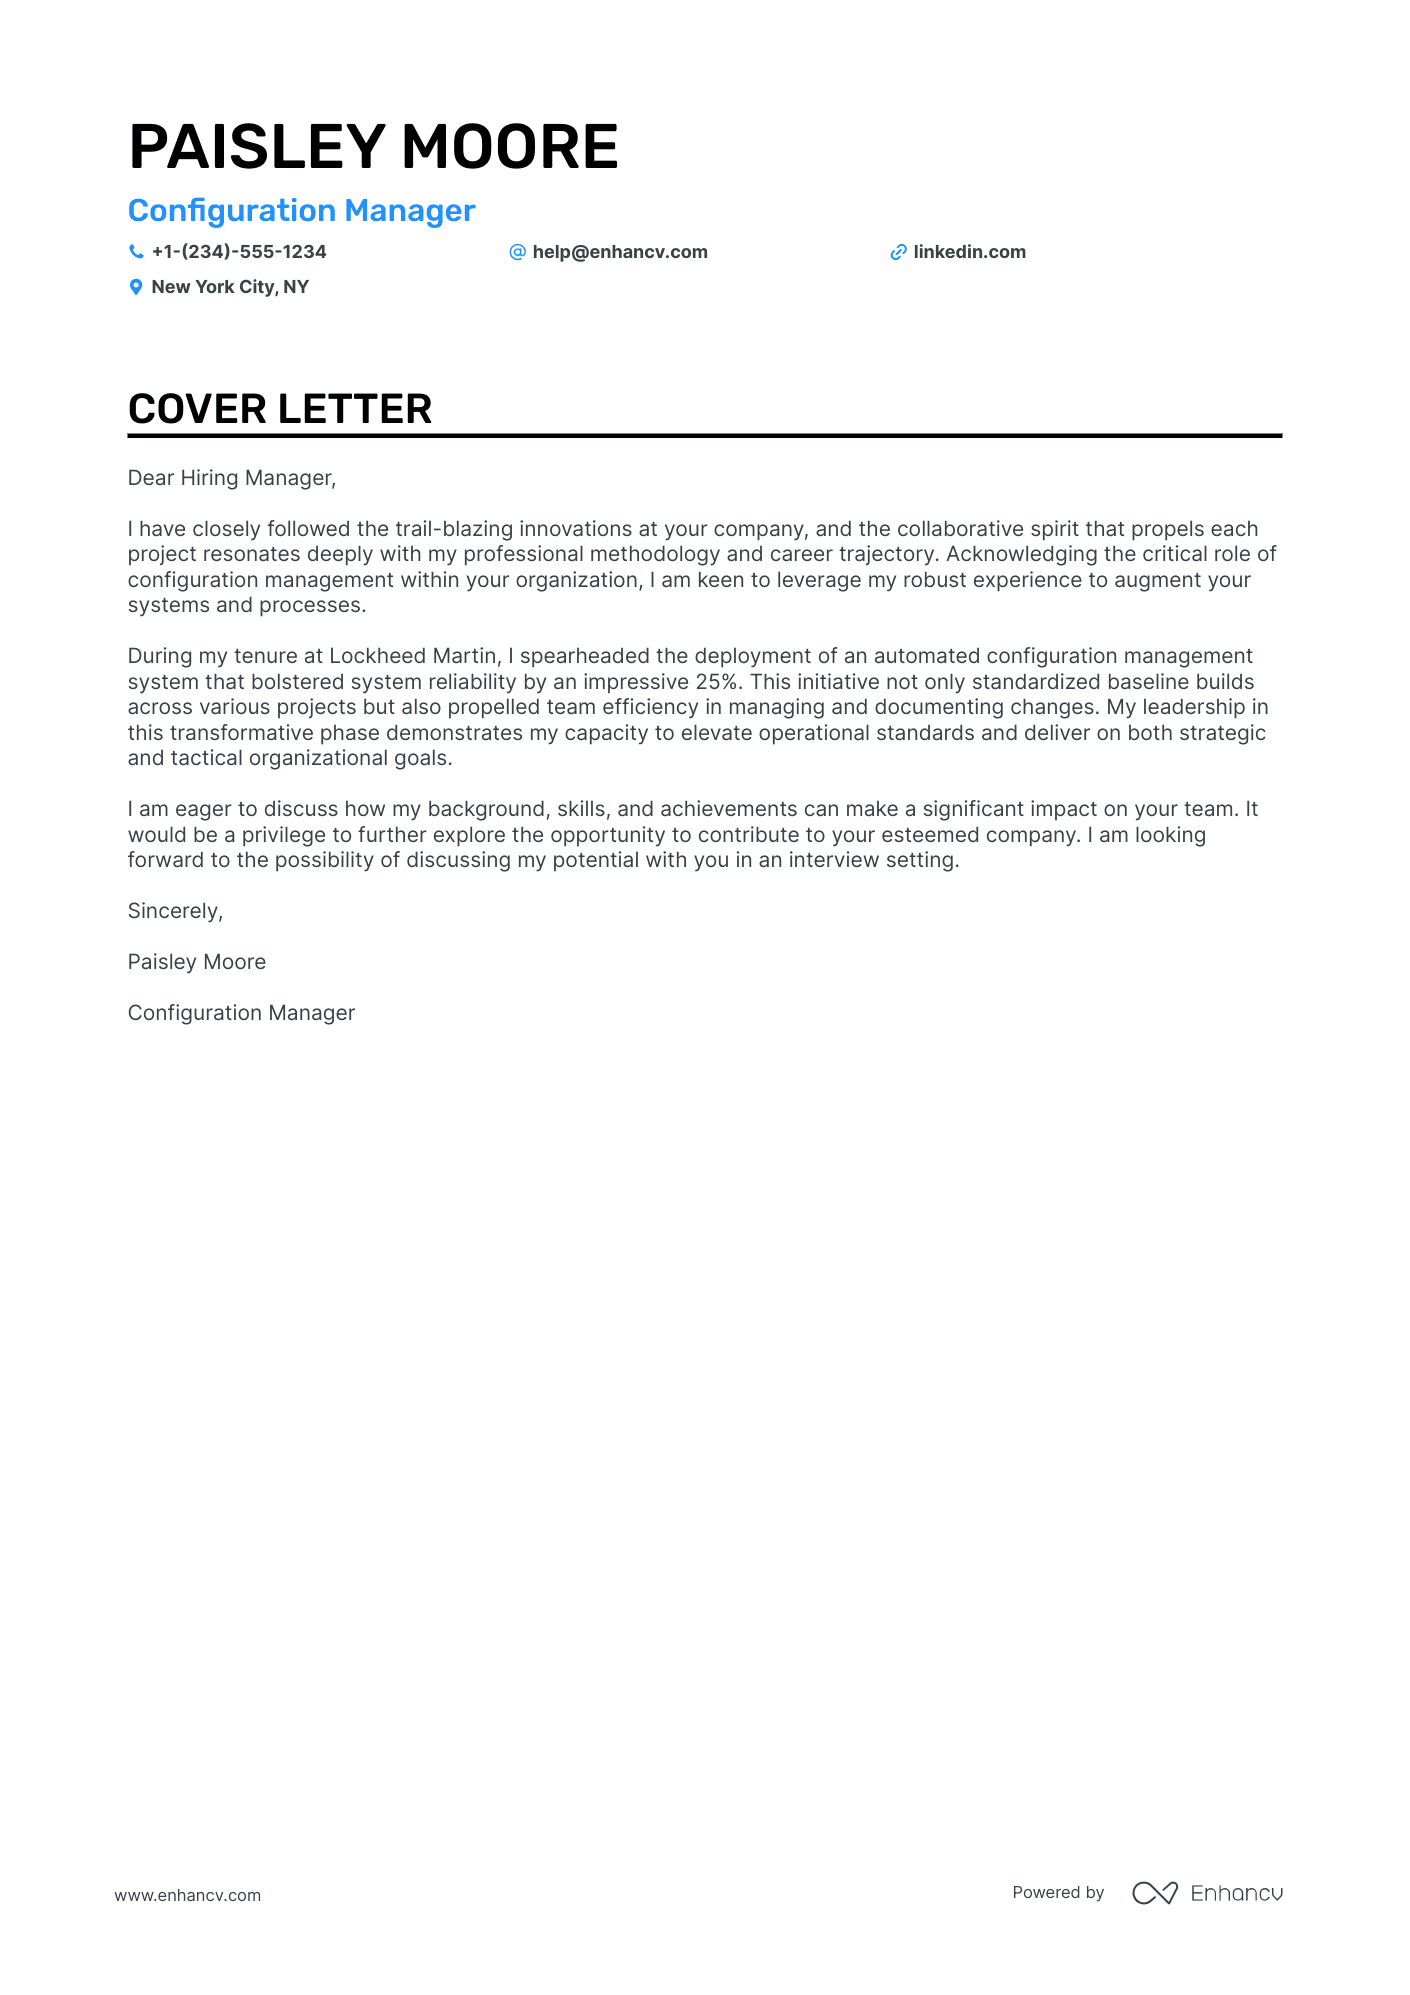 Configuration Manager cover letter